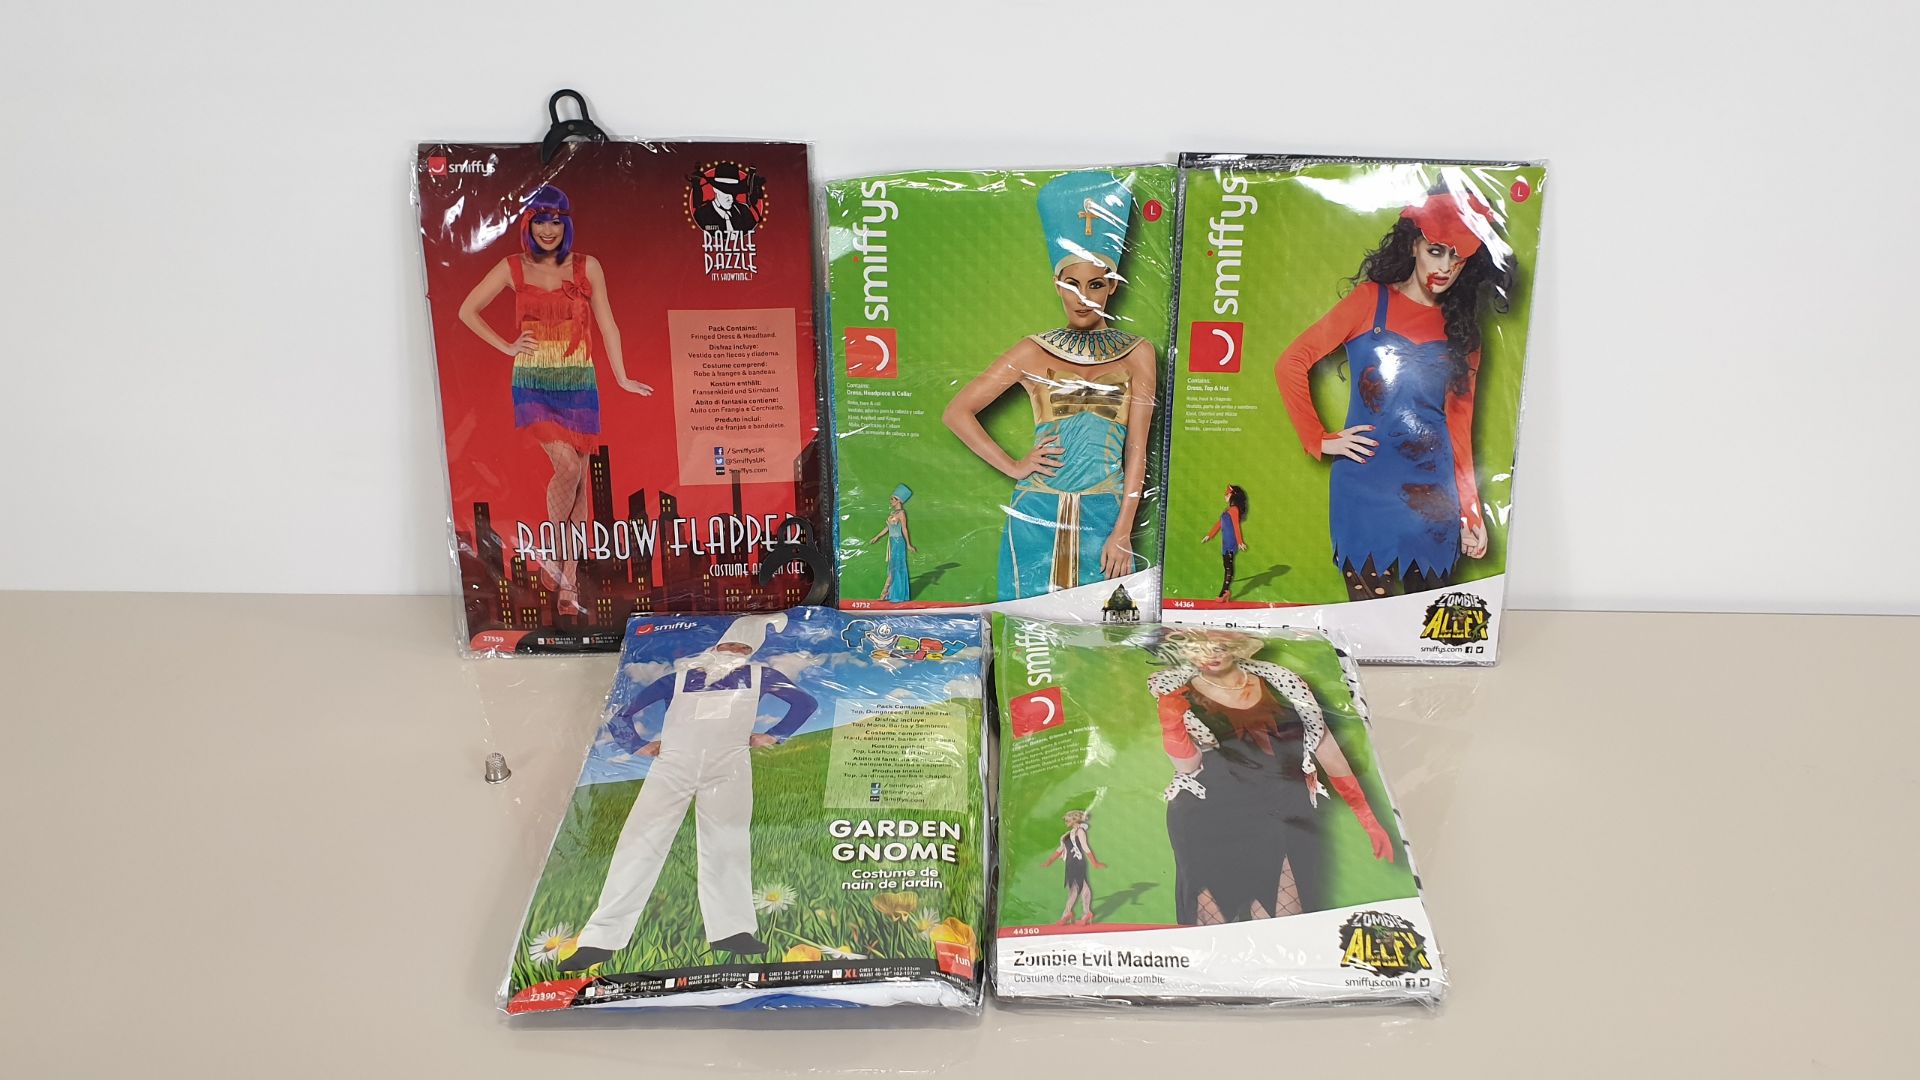 48 X ASSORTED COSTUMES - IN ASSORTED BRANDS (SMIFFYS, FEVER ETC), STYLES AND SIZES - IN 2 BOXES